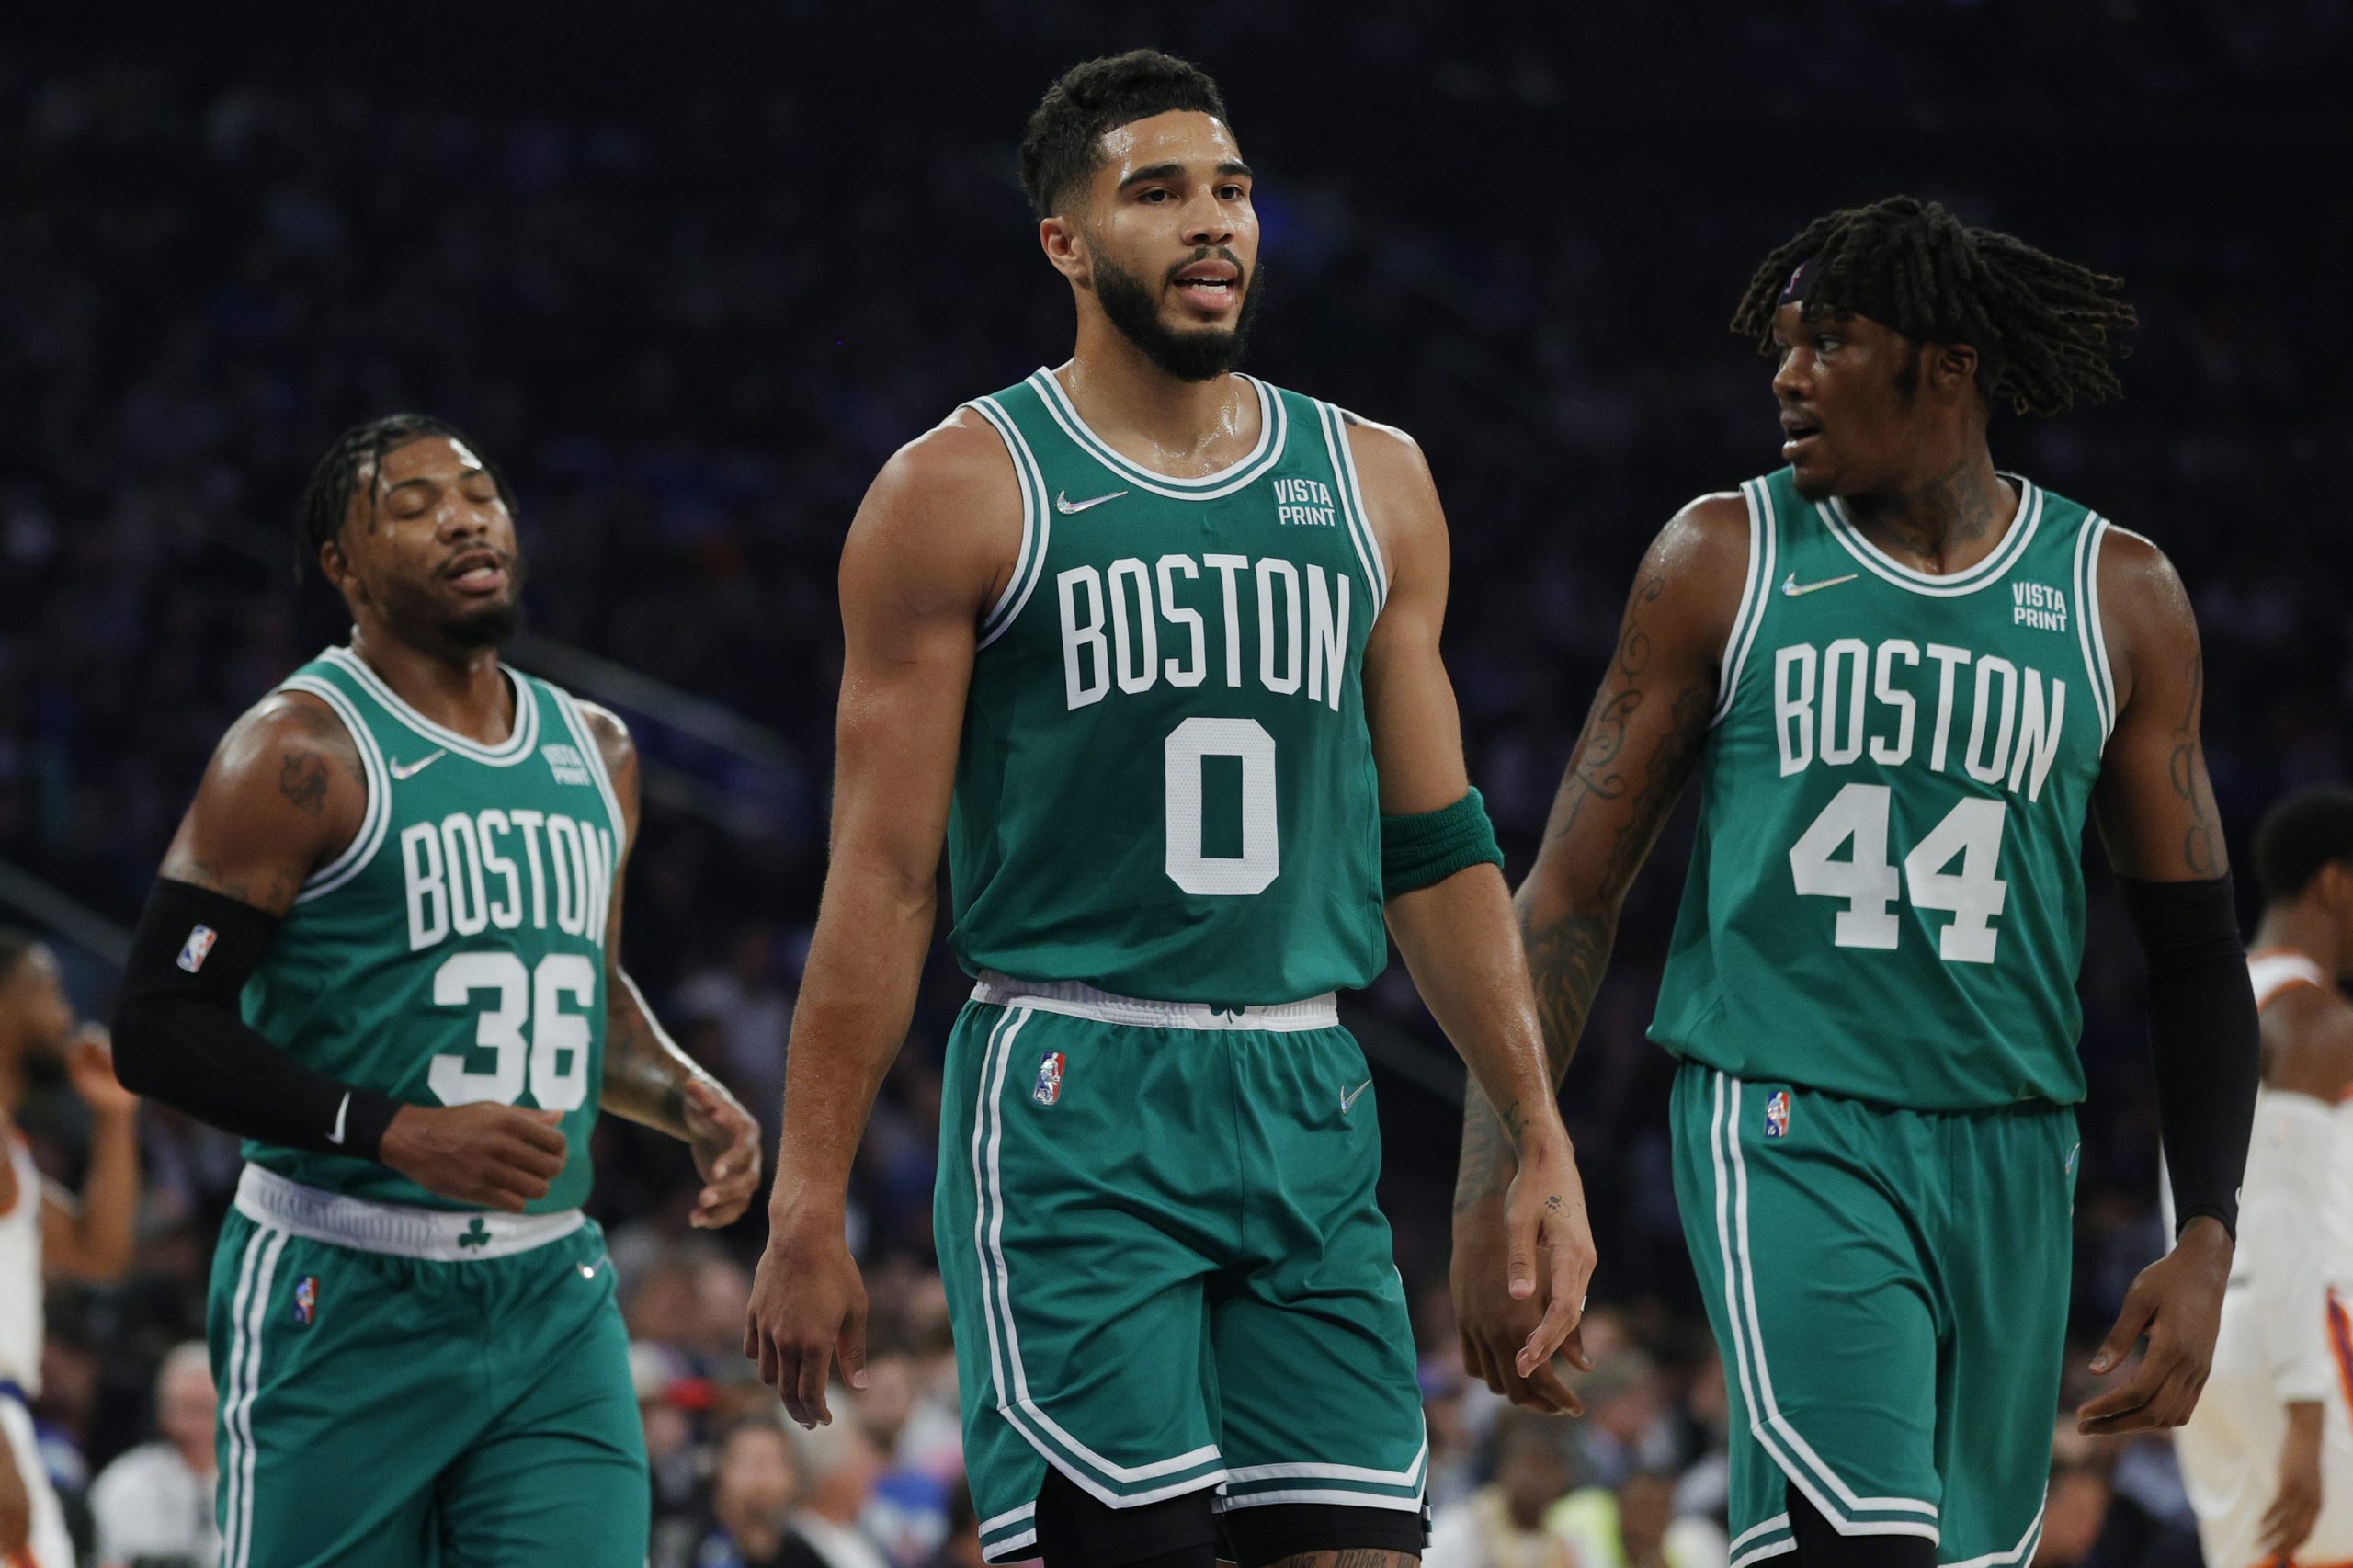 Boston Celtics vs Chicago Bulls: Match Prediction, Injury Report & Players to watch out for